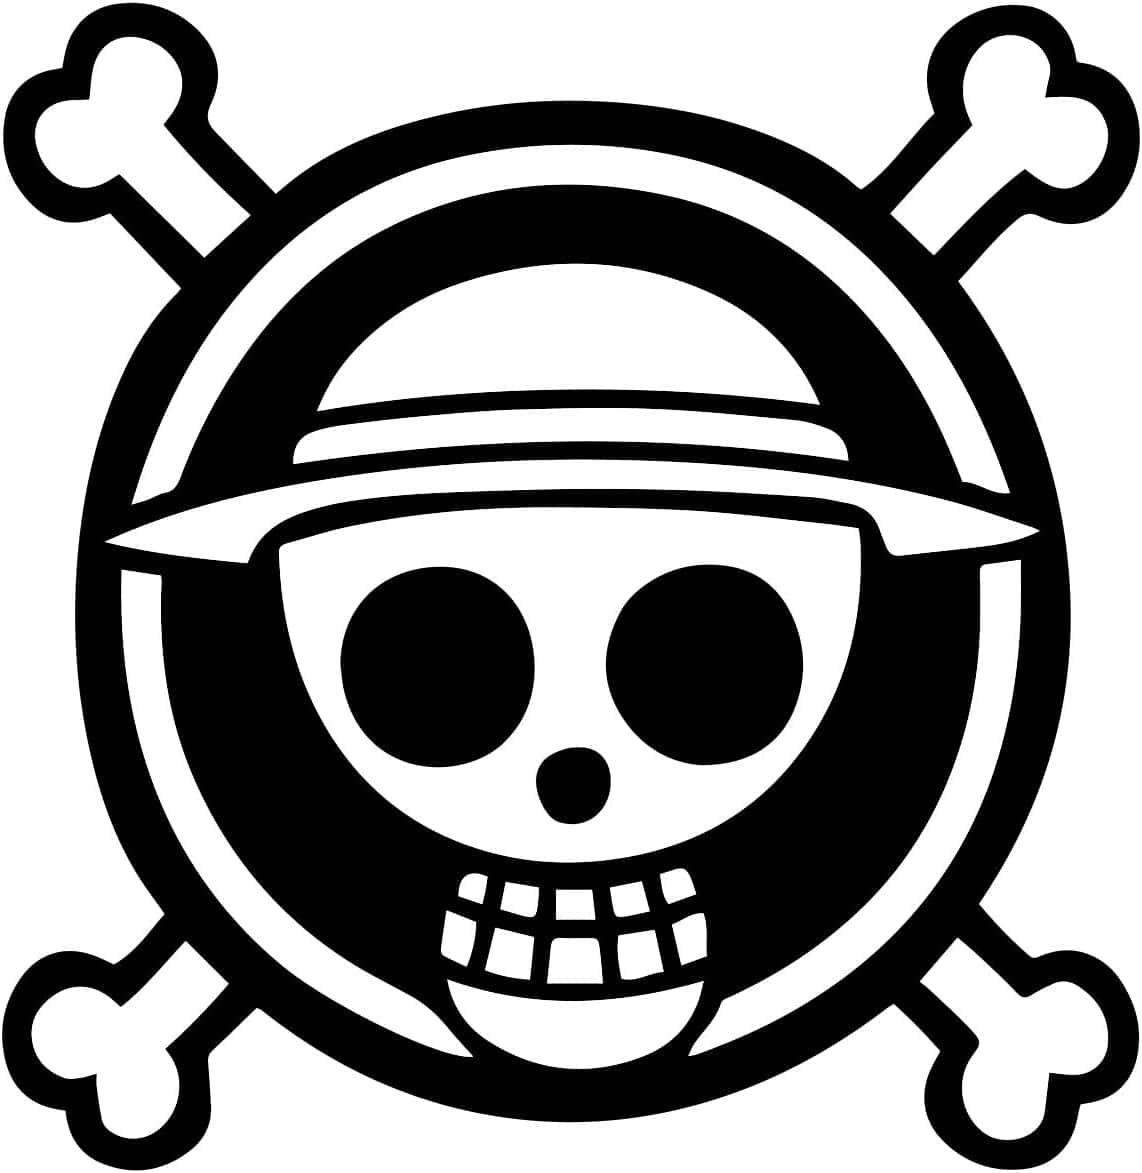 One Piece Logo With Skull And Crossbones Wallpaper